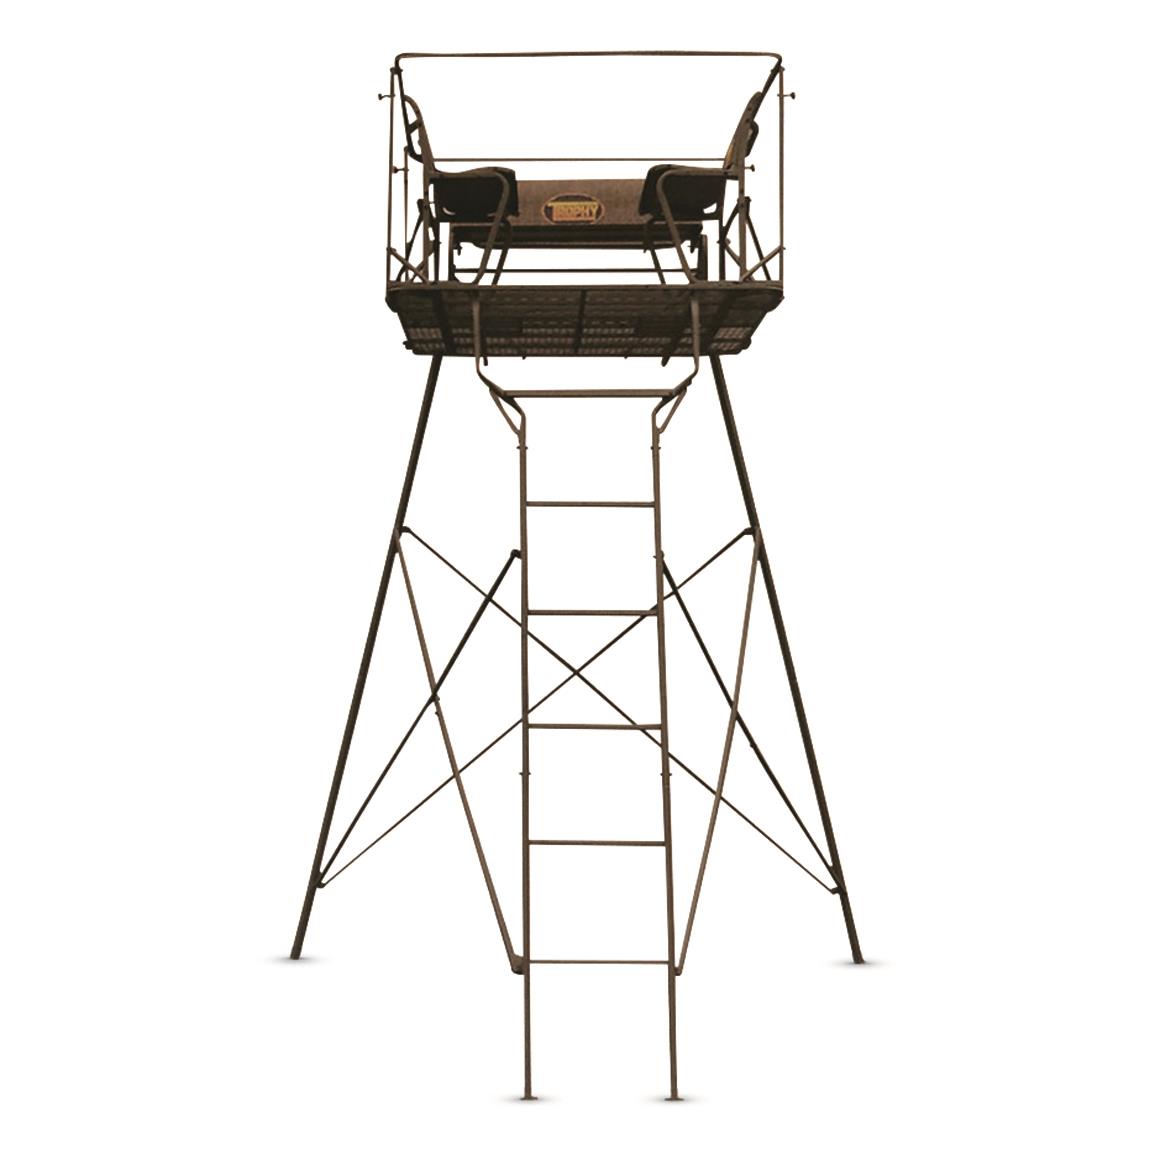 Trophy Sky Fort 12' 3-Person Tower Stand - 733846, Tower & Tripod